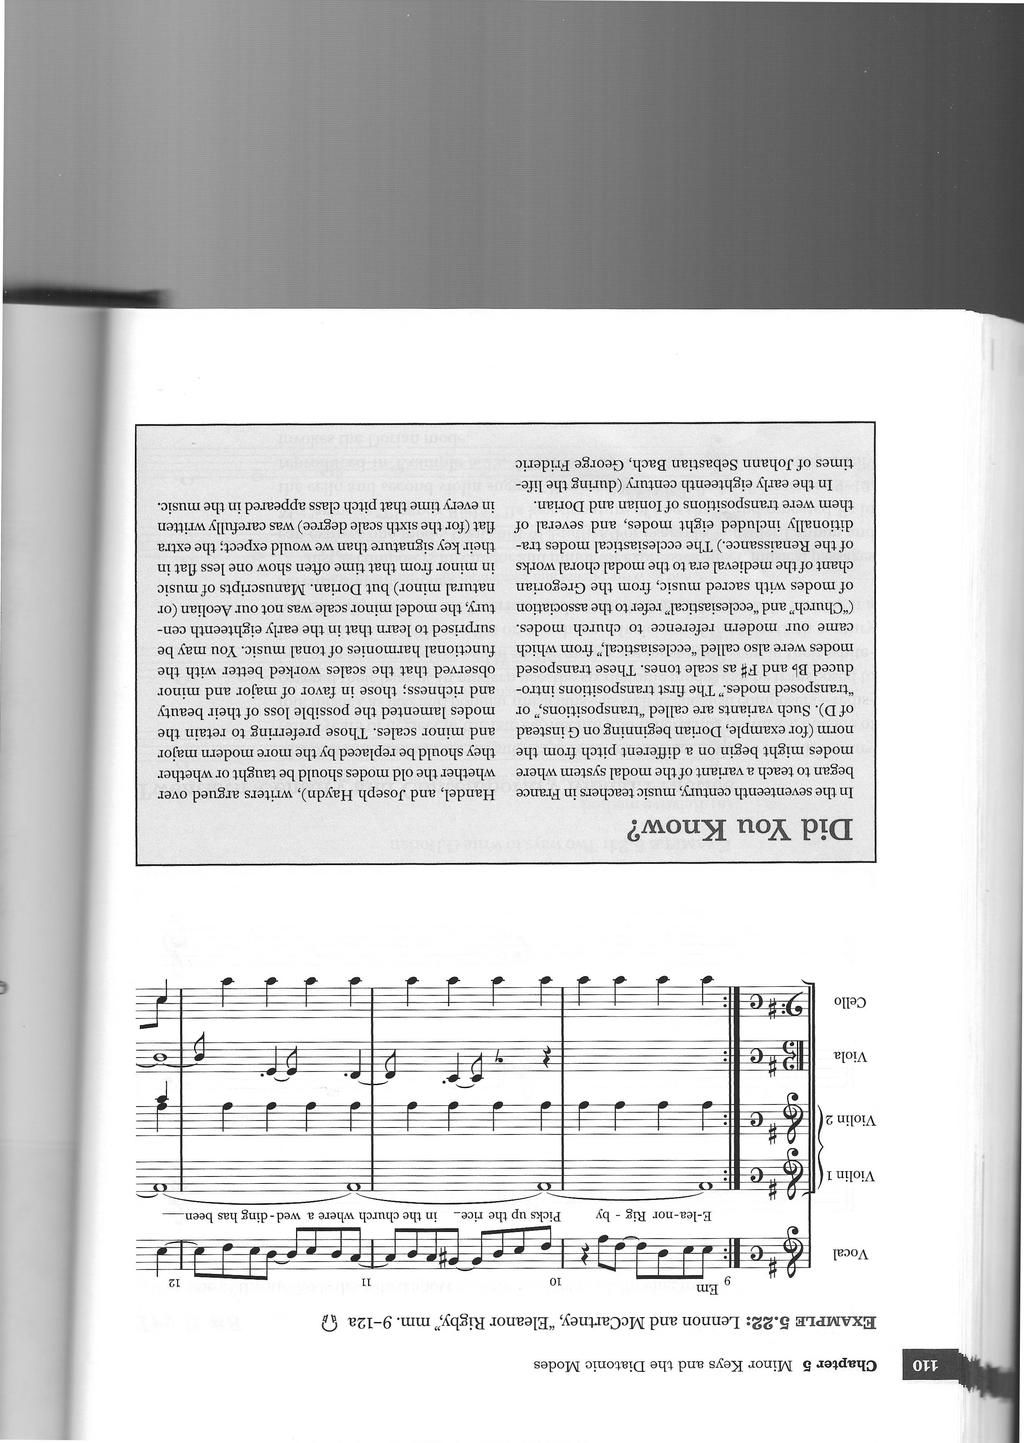 Twentieth-Century and Contemporary Modal Practice The diatonic modes were not used much in the 18th and 19th centuries.